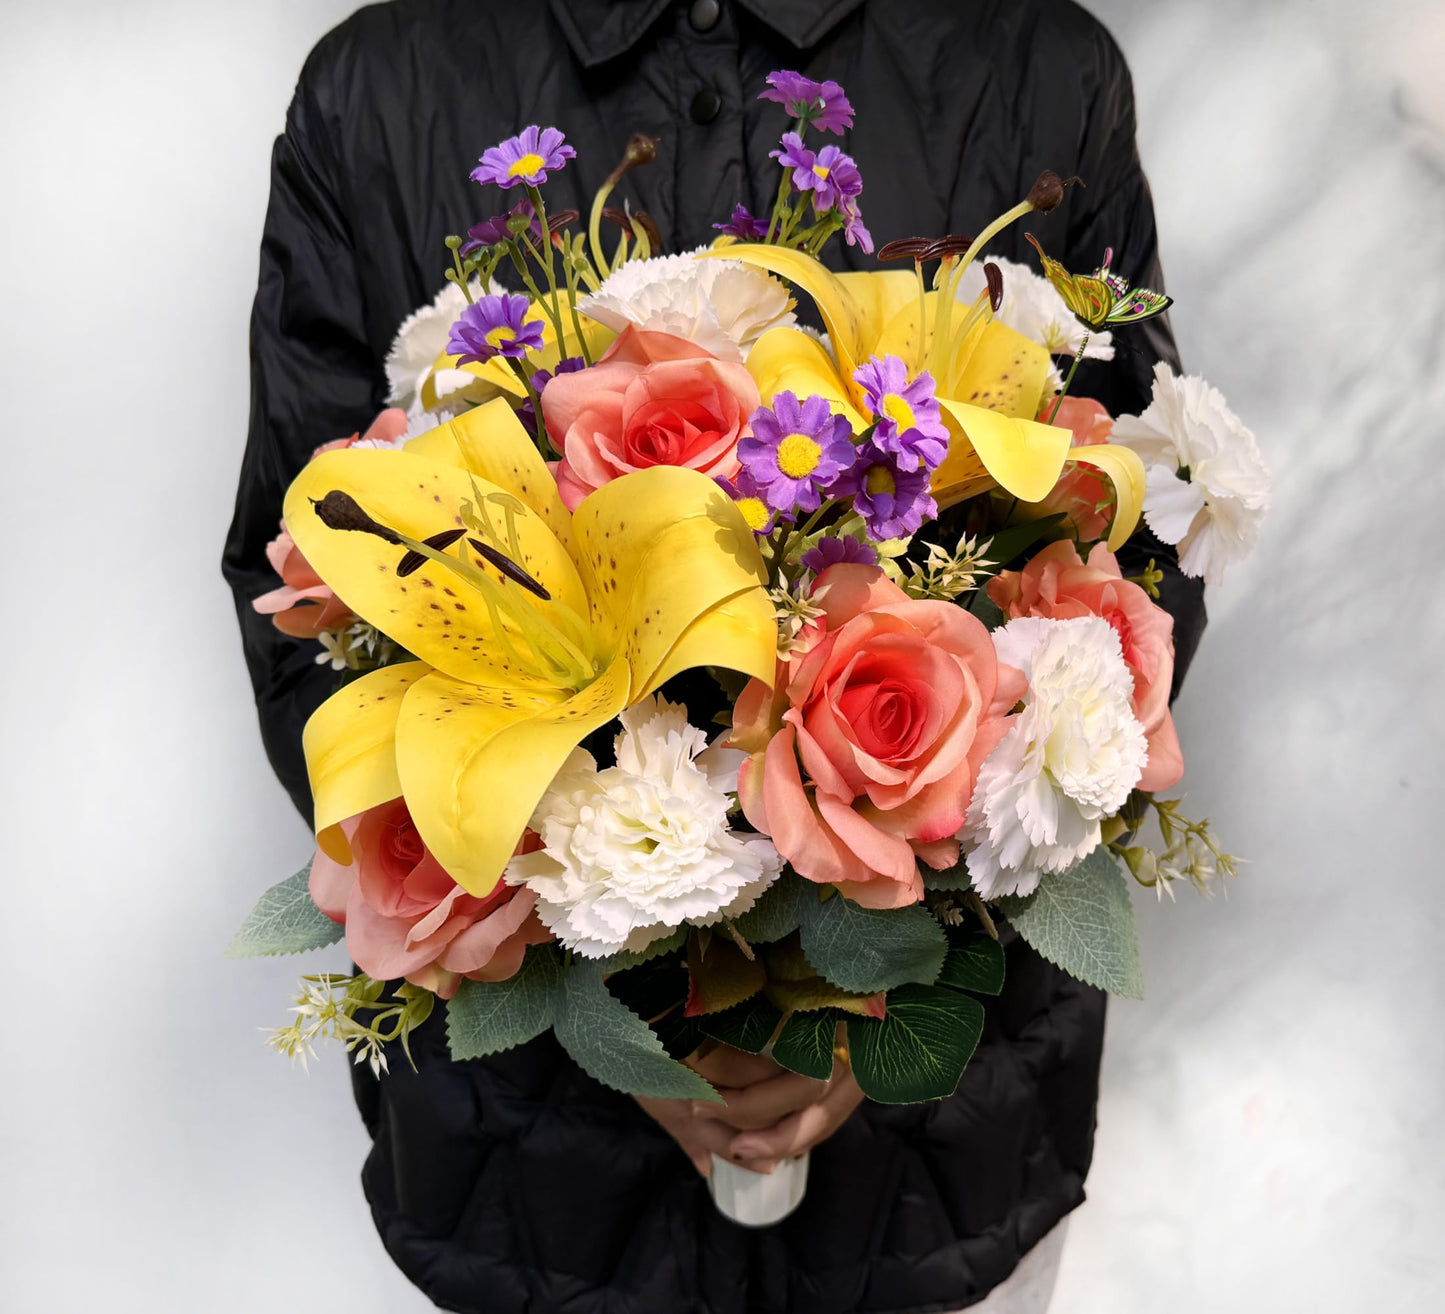 Saxili Silk Artificial Cemetery Flowers - Vivid Spring Grave Flower - Outdoor Headstone Flower Decorations - Lily Rose Carnations